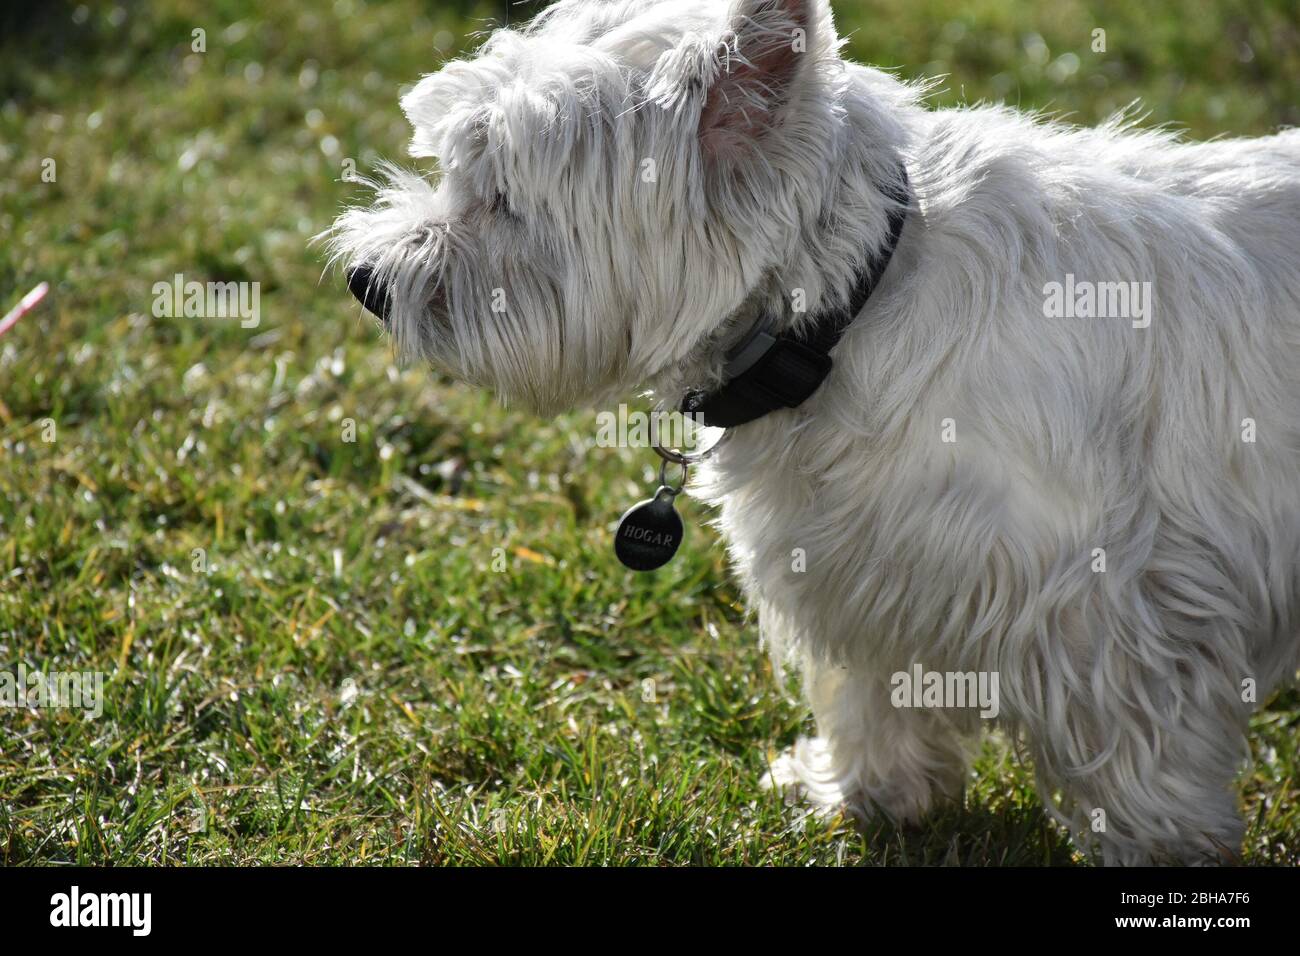 White dog with a black collar, standing in the grass Stock Photo